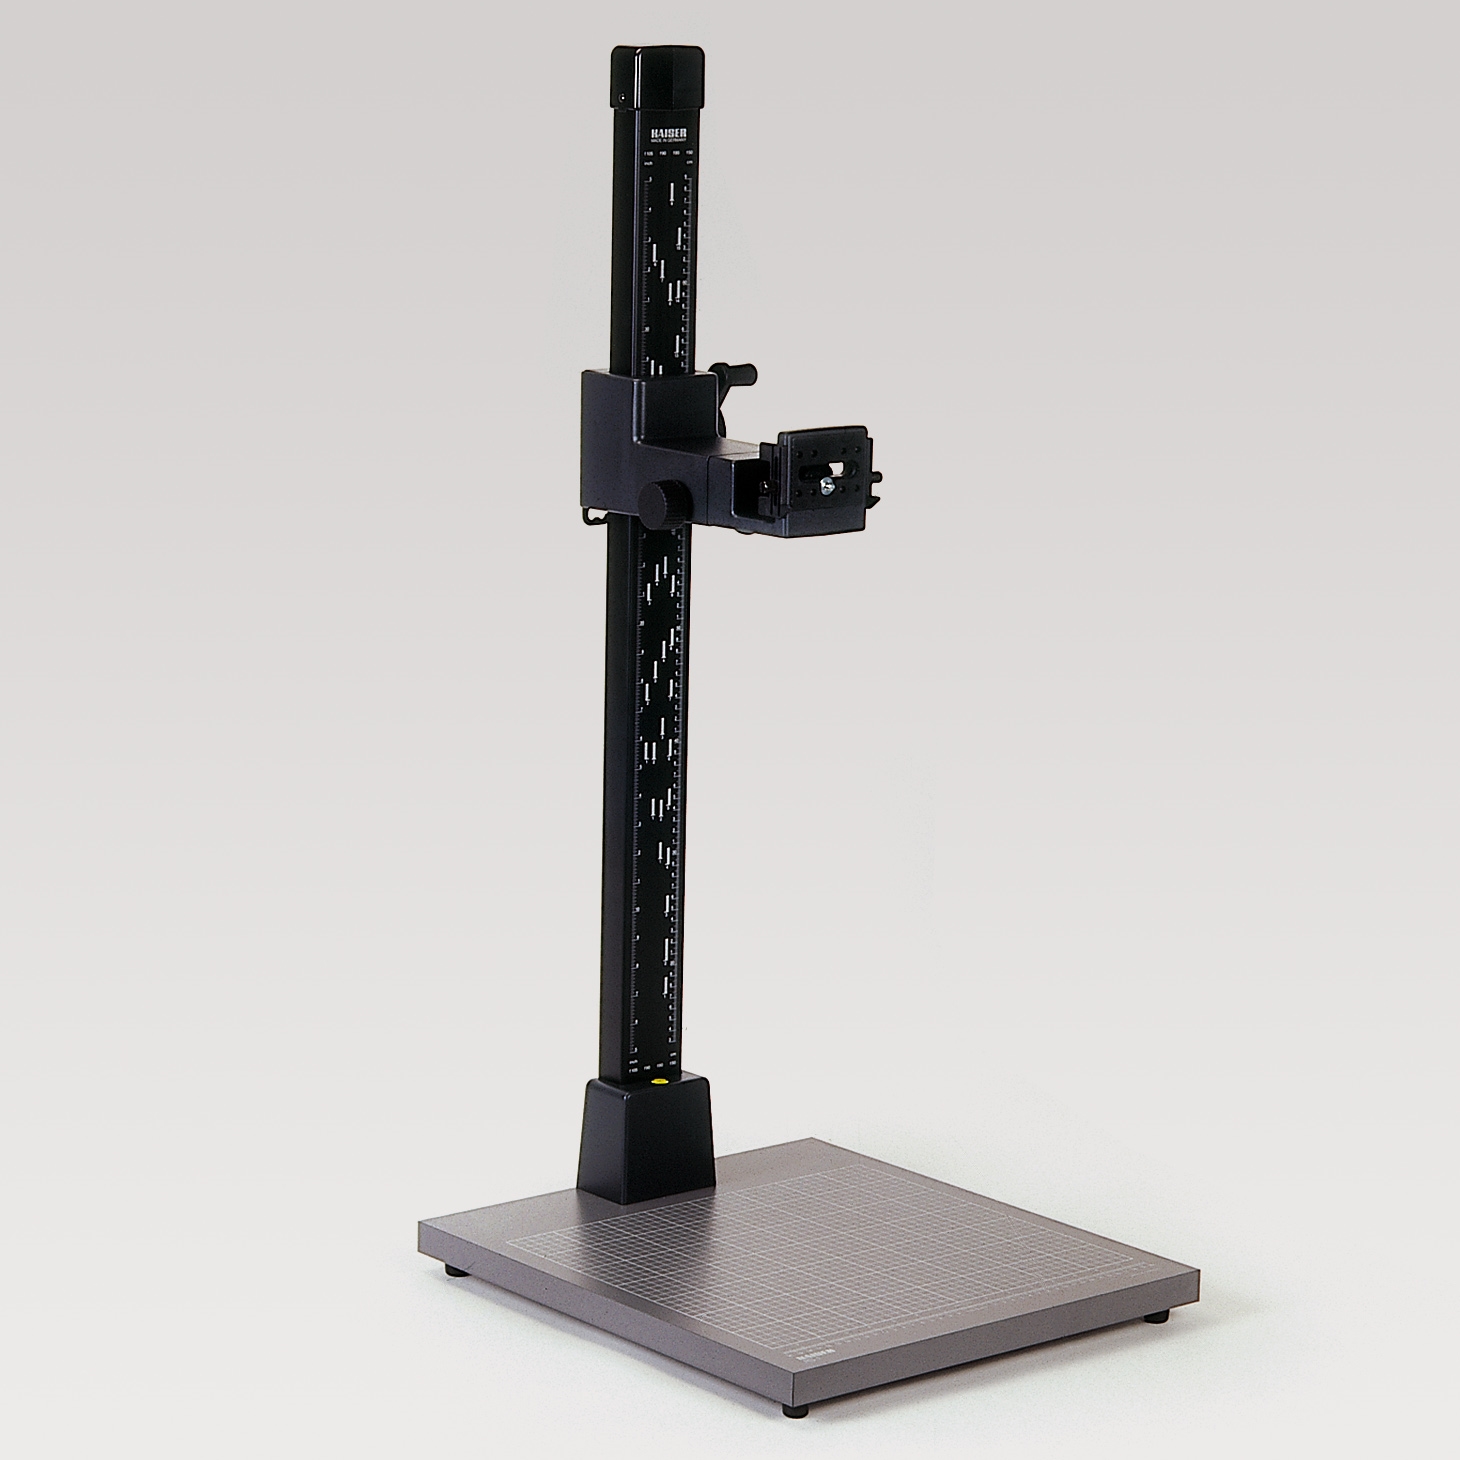 KAISER 5510 RS1 COPY STAND WITH RA 1 CAMERA ARM